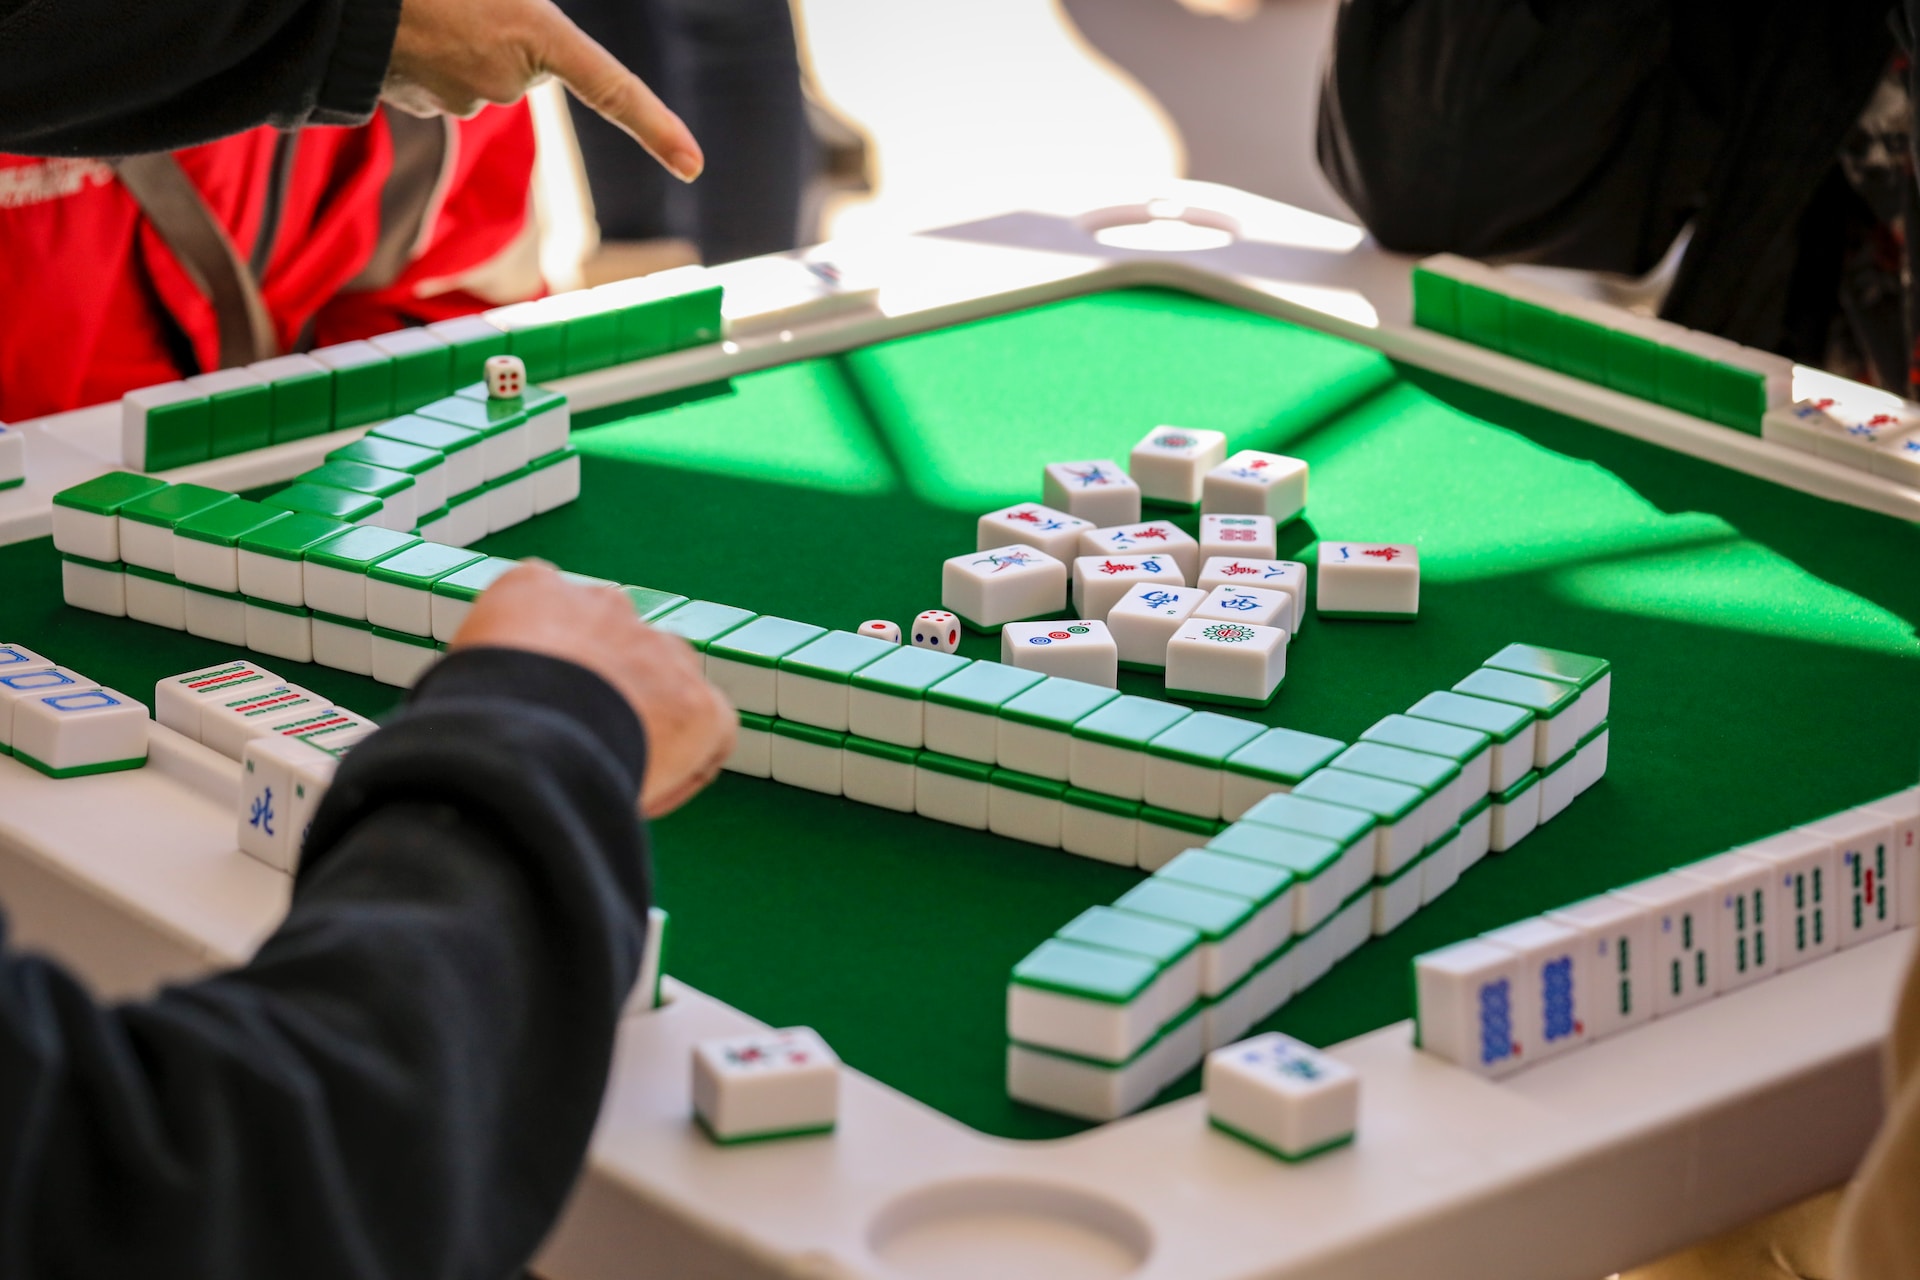 A close up of a game of dominos on a table